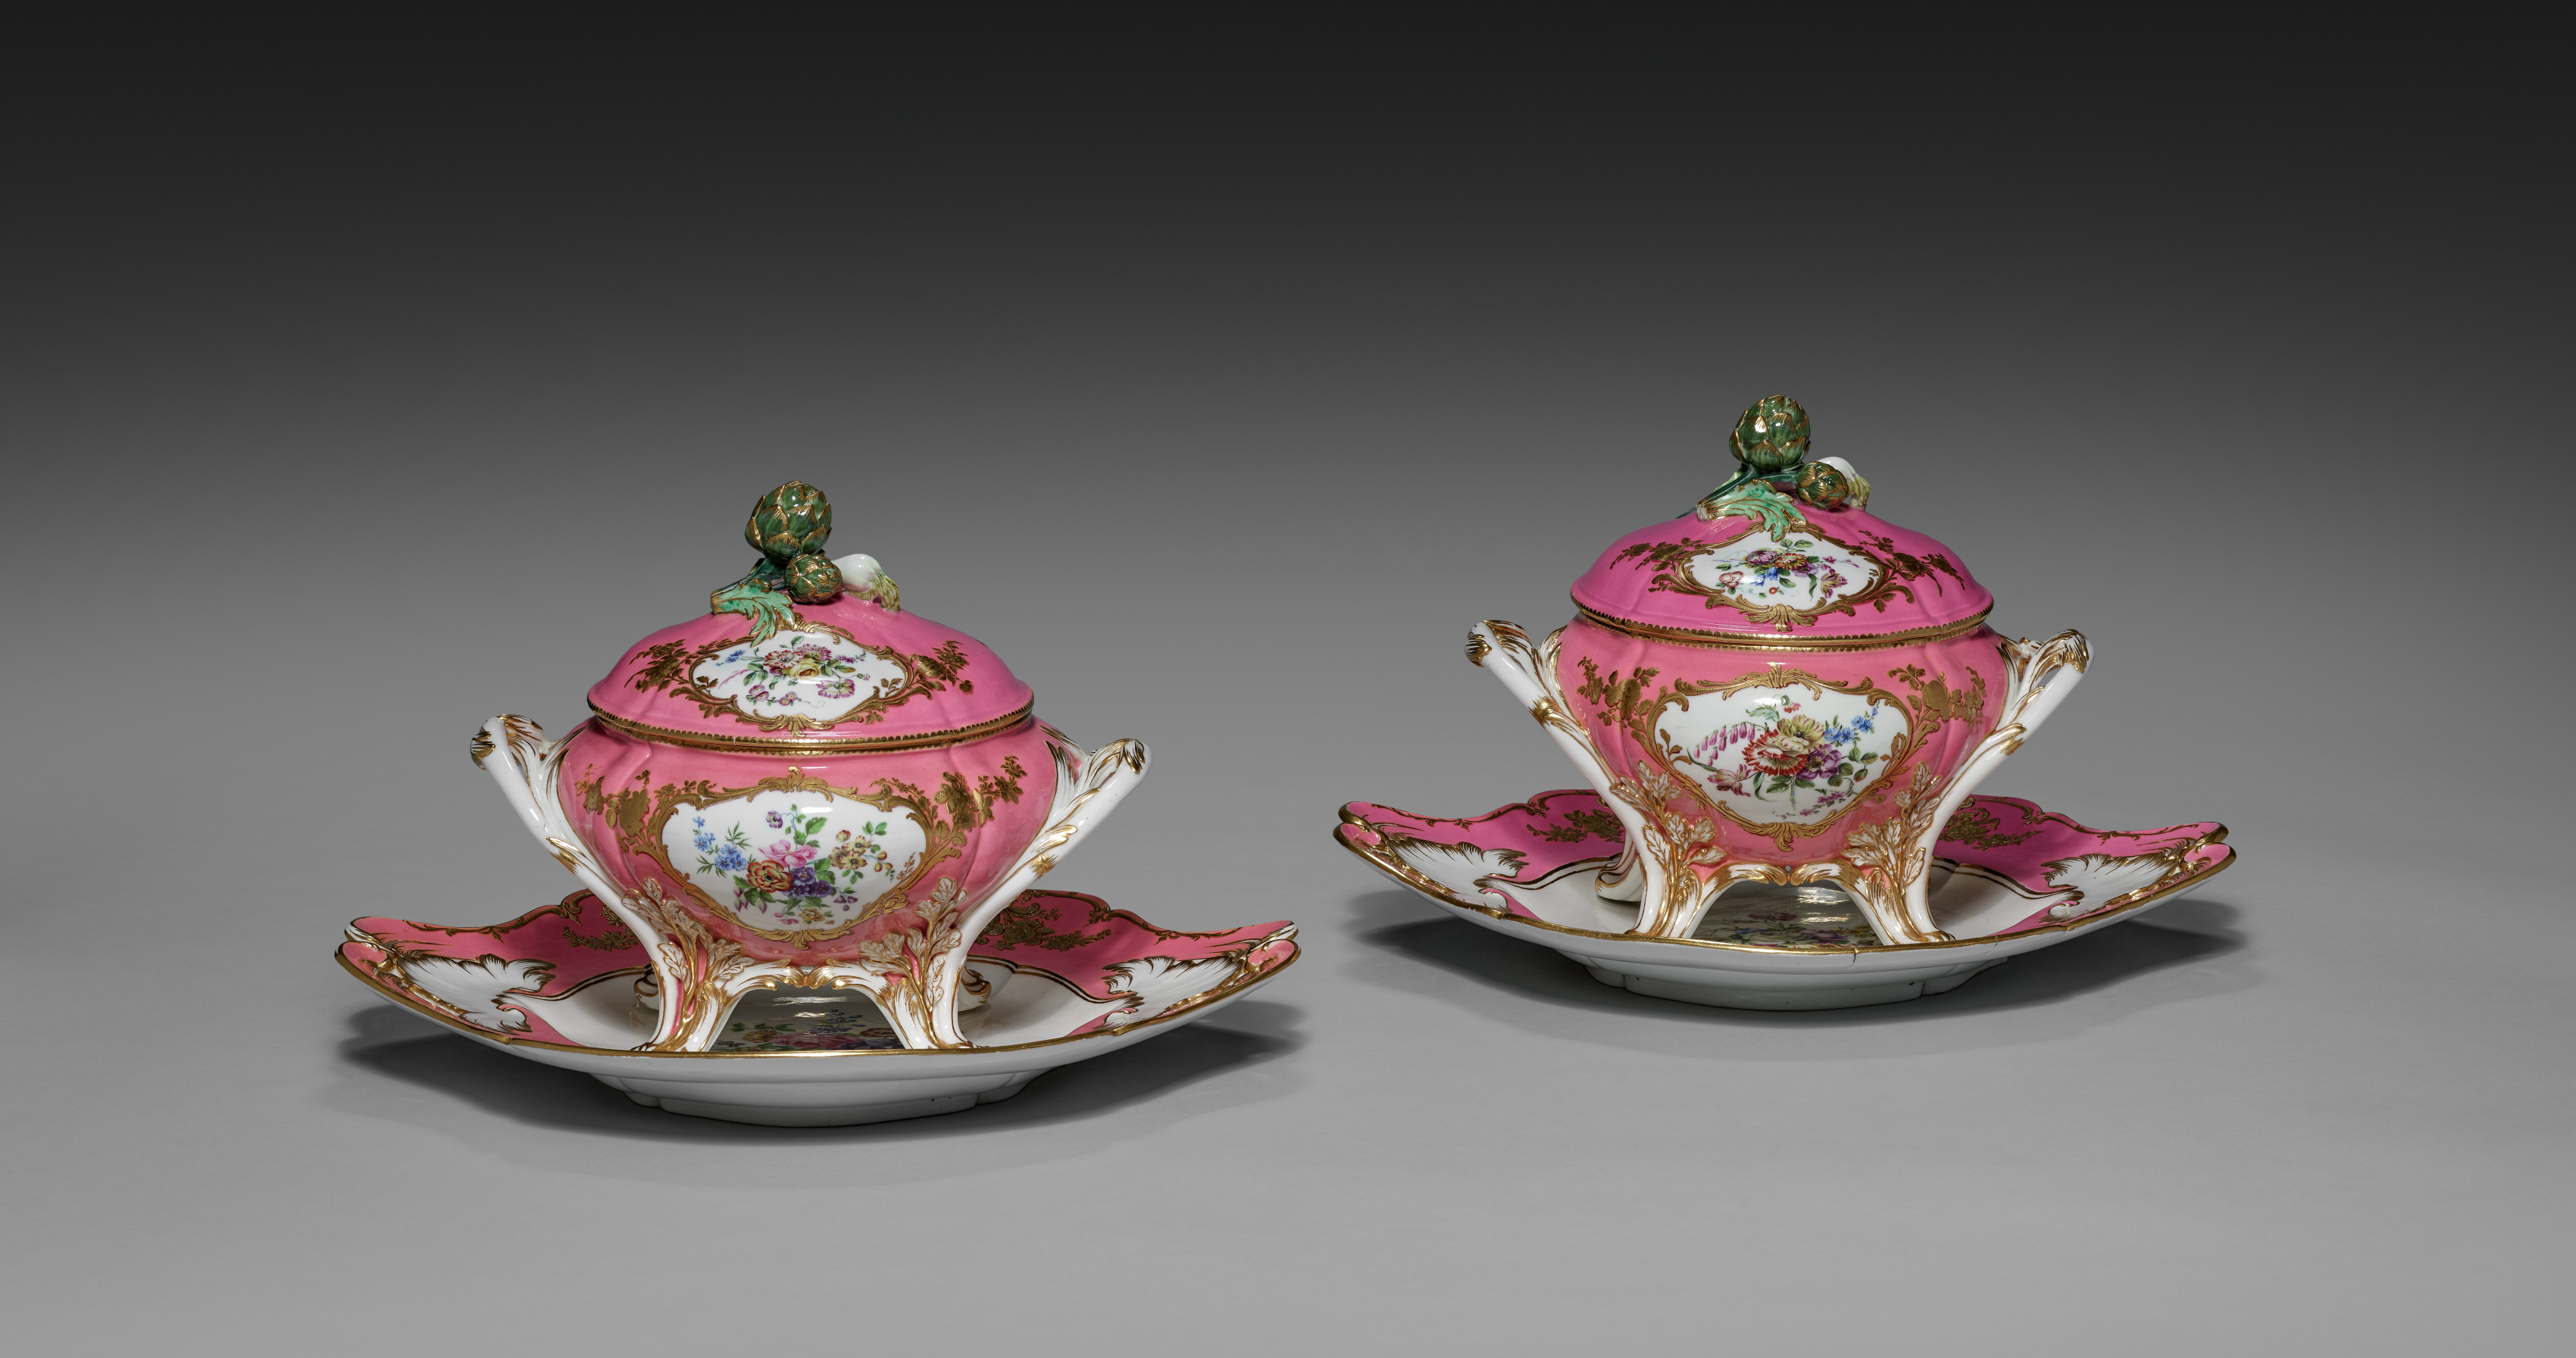 Pair of Covered Tureens on Stand (Paire de pots-à-oille)